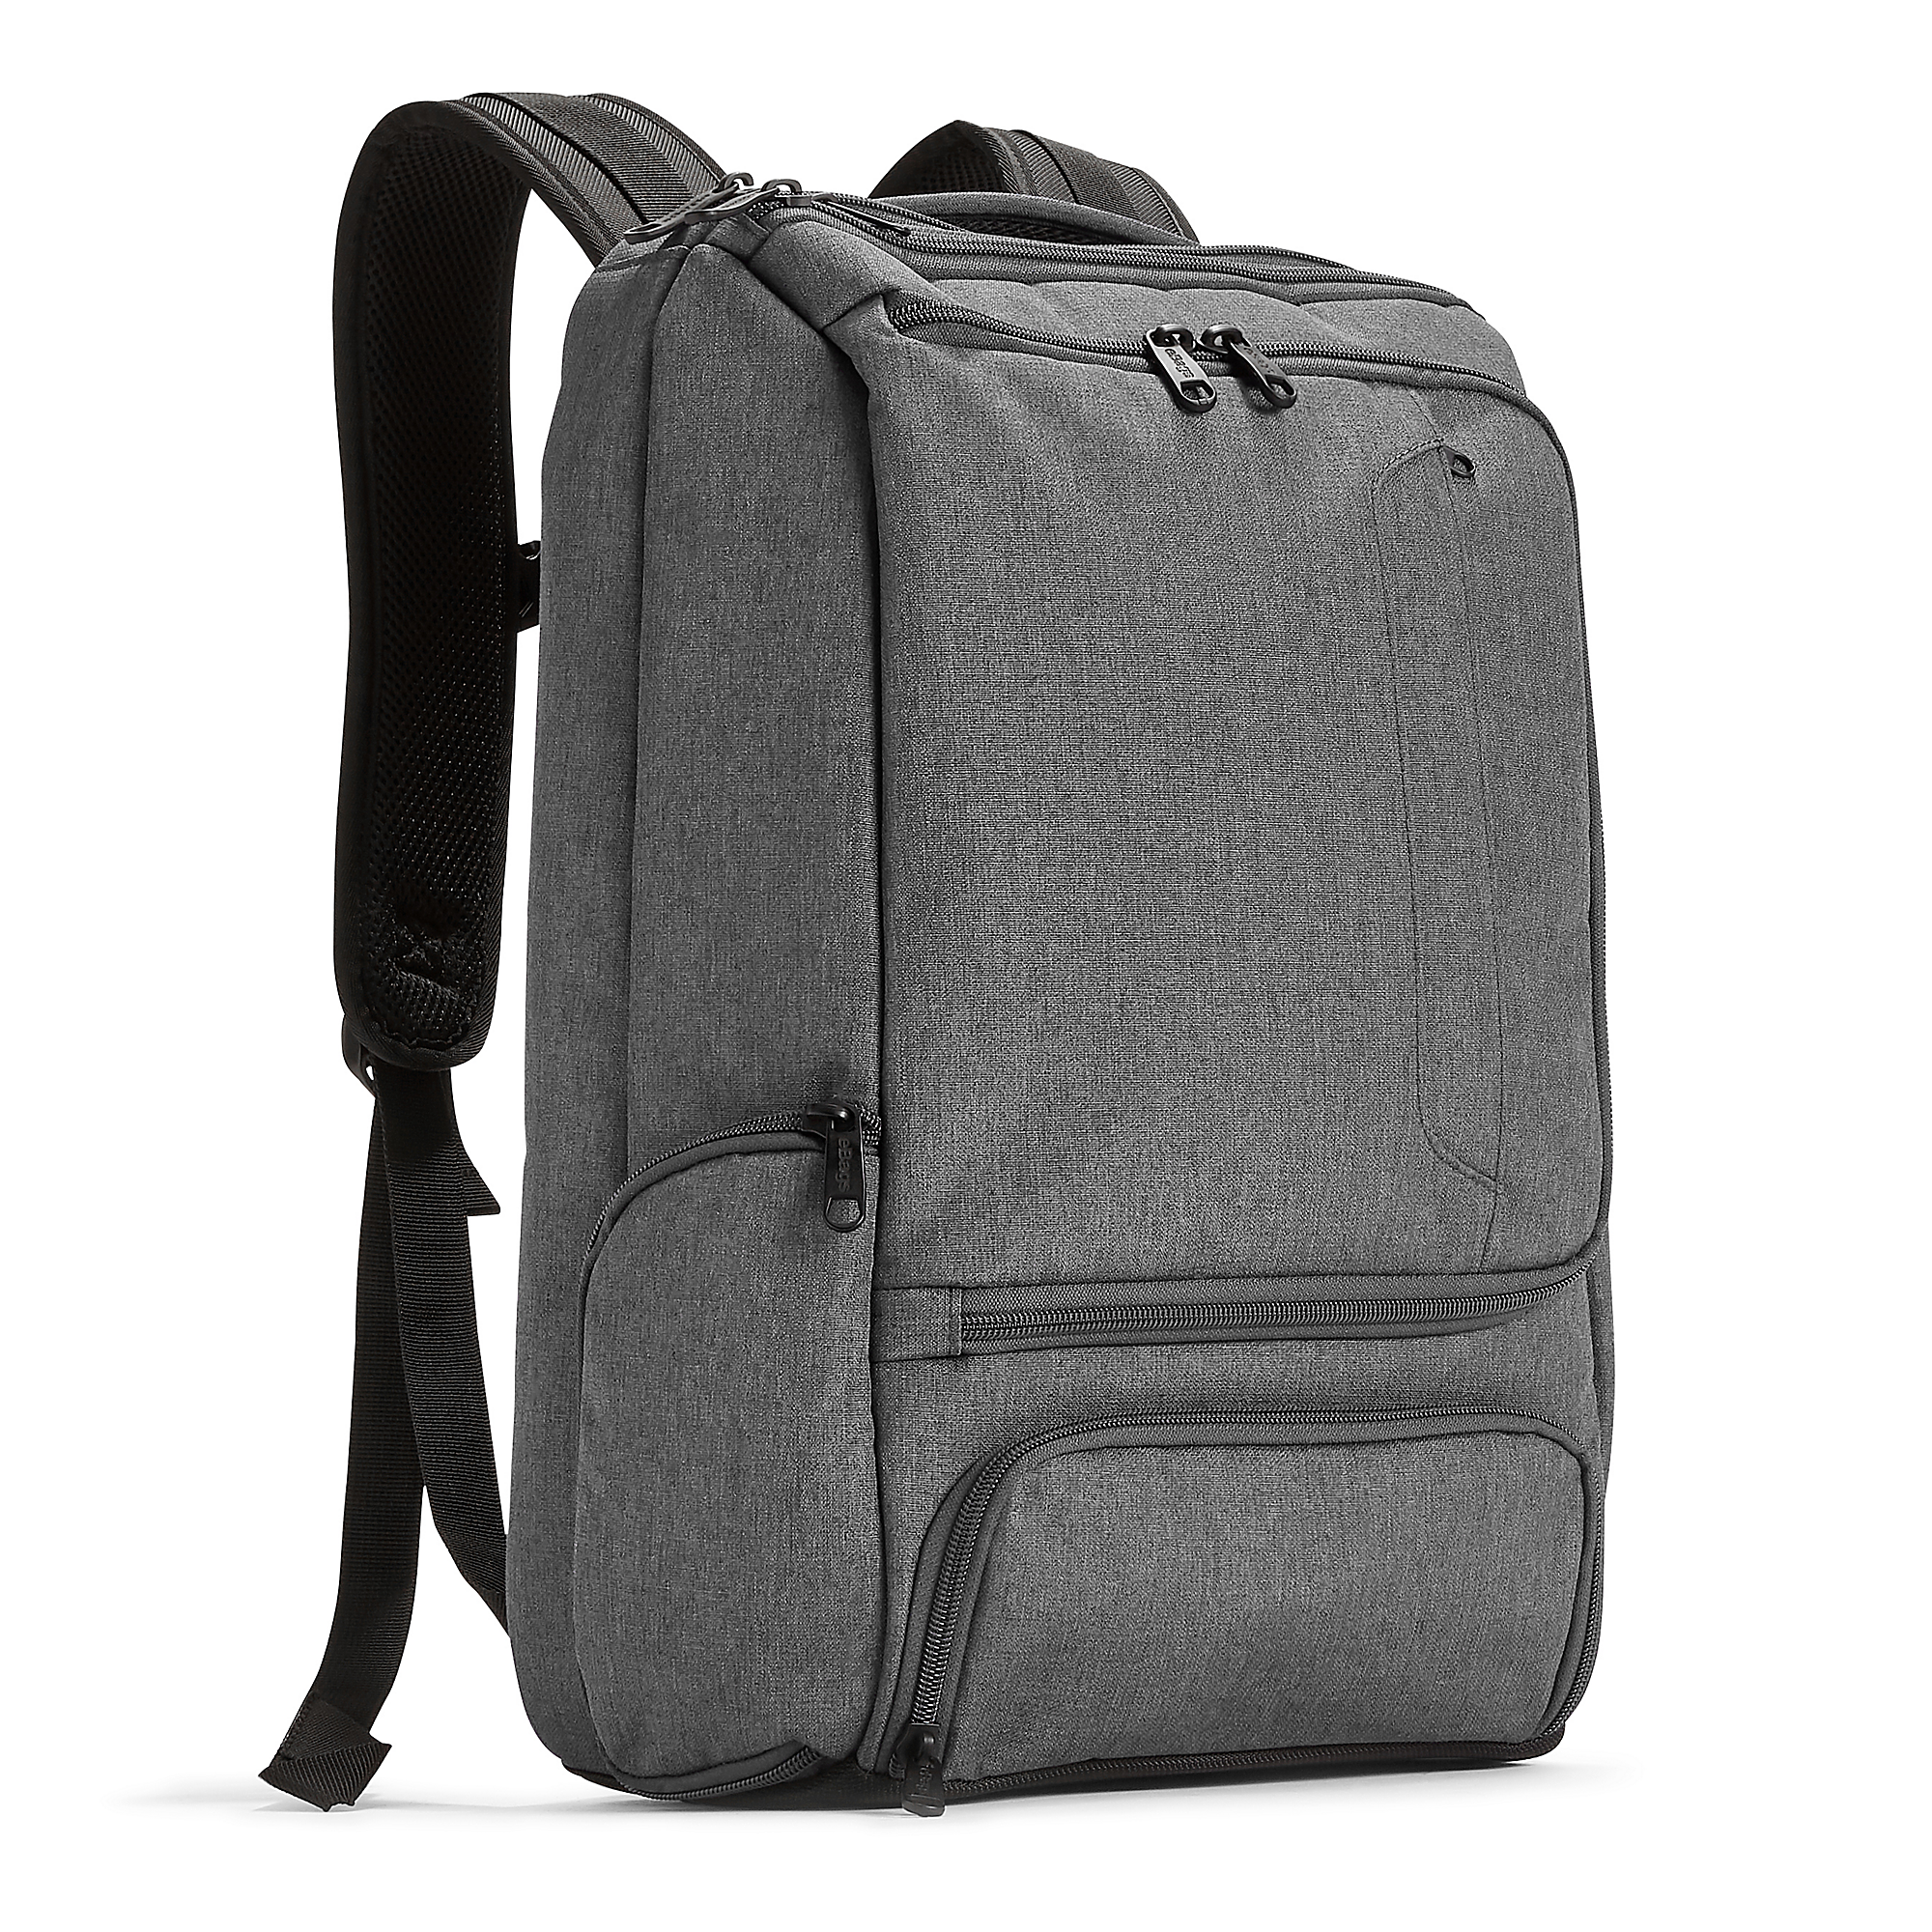 Best Laptop Bags for Office and Home: Types & Features | Amazon Business